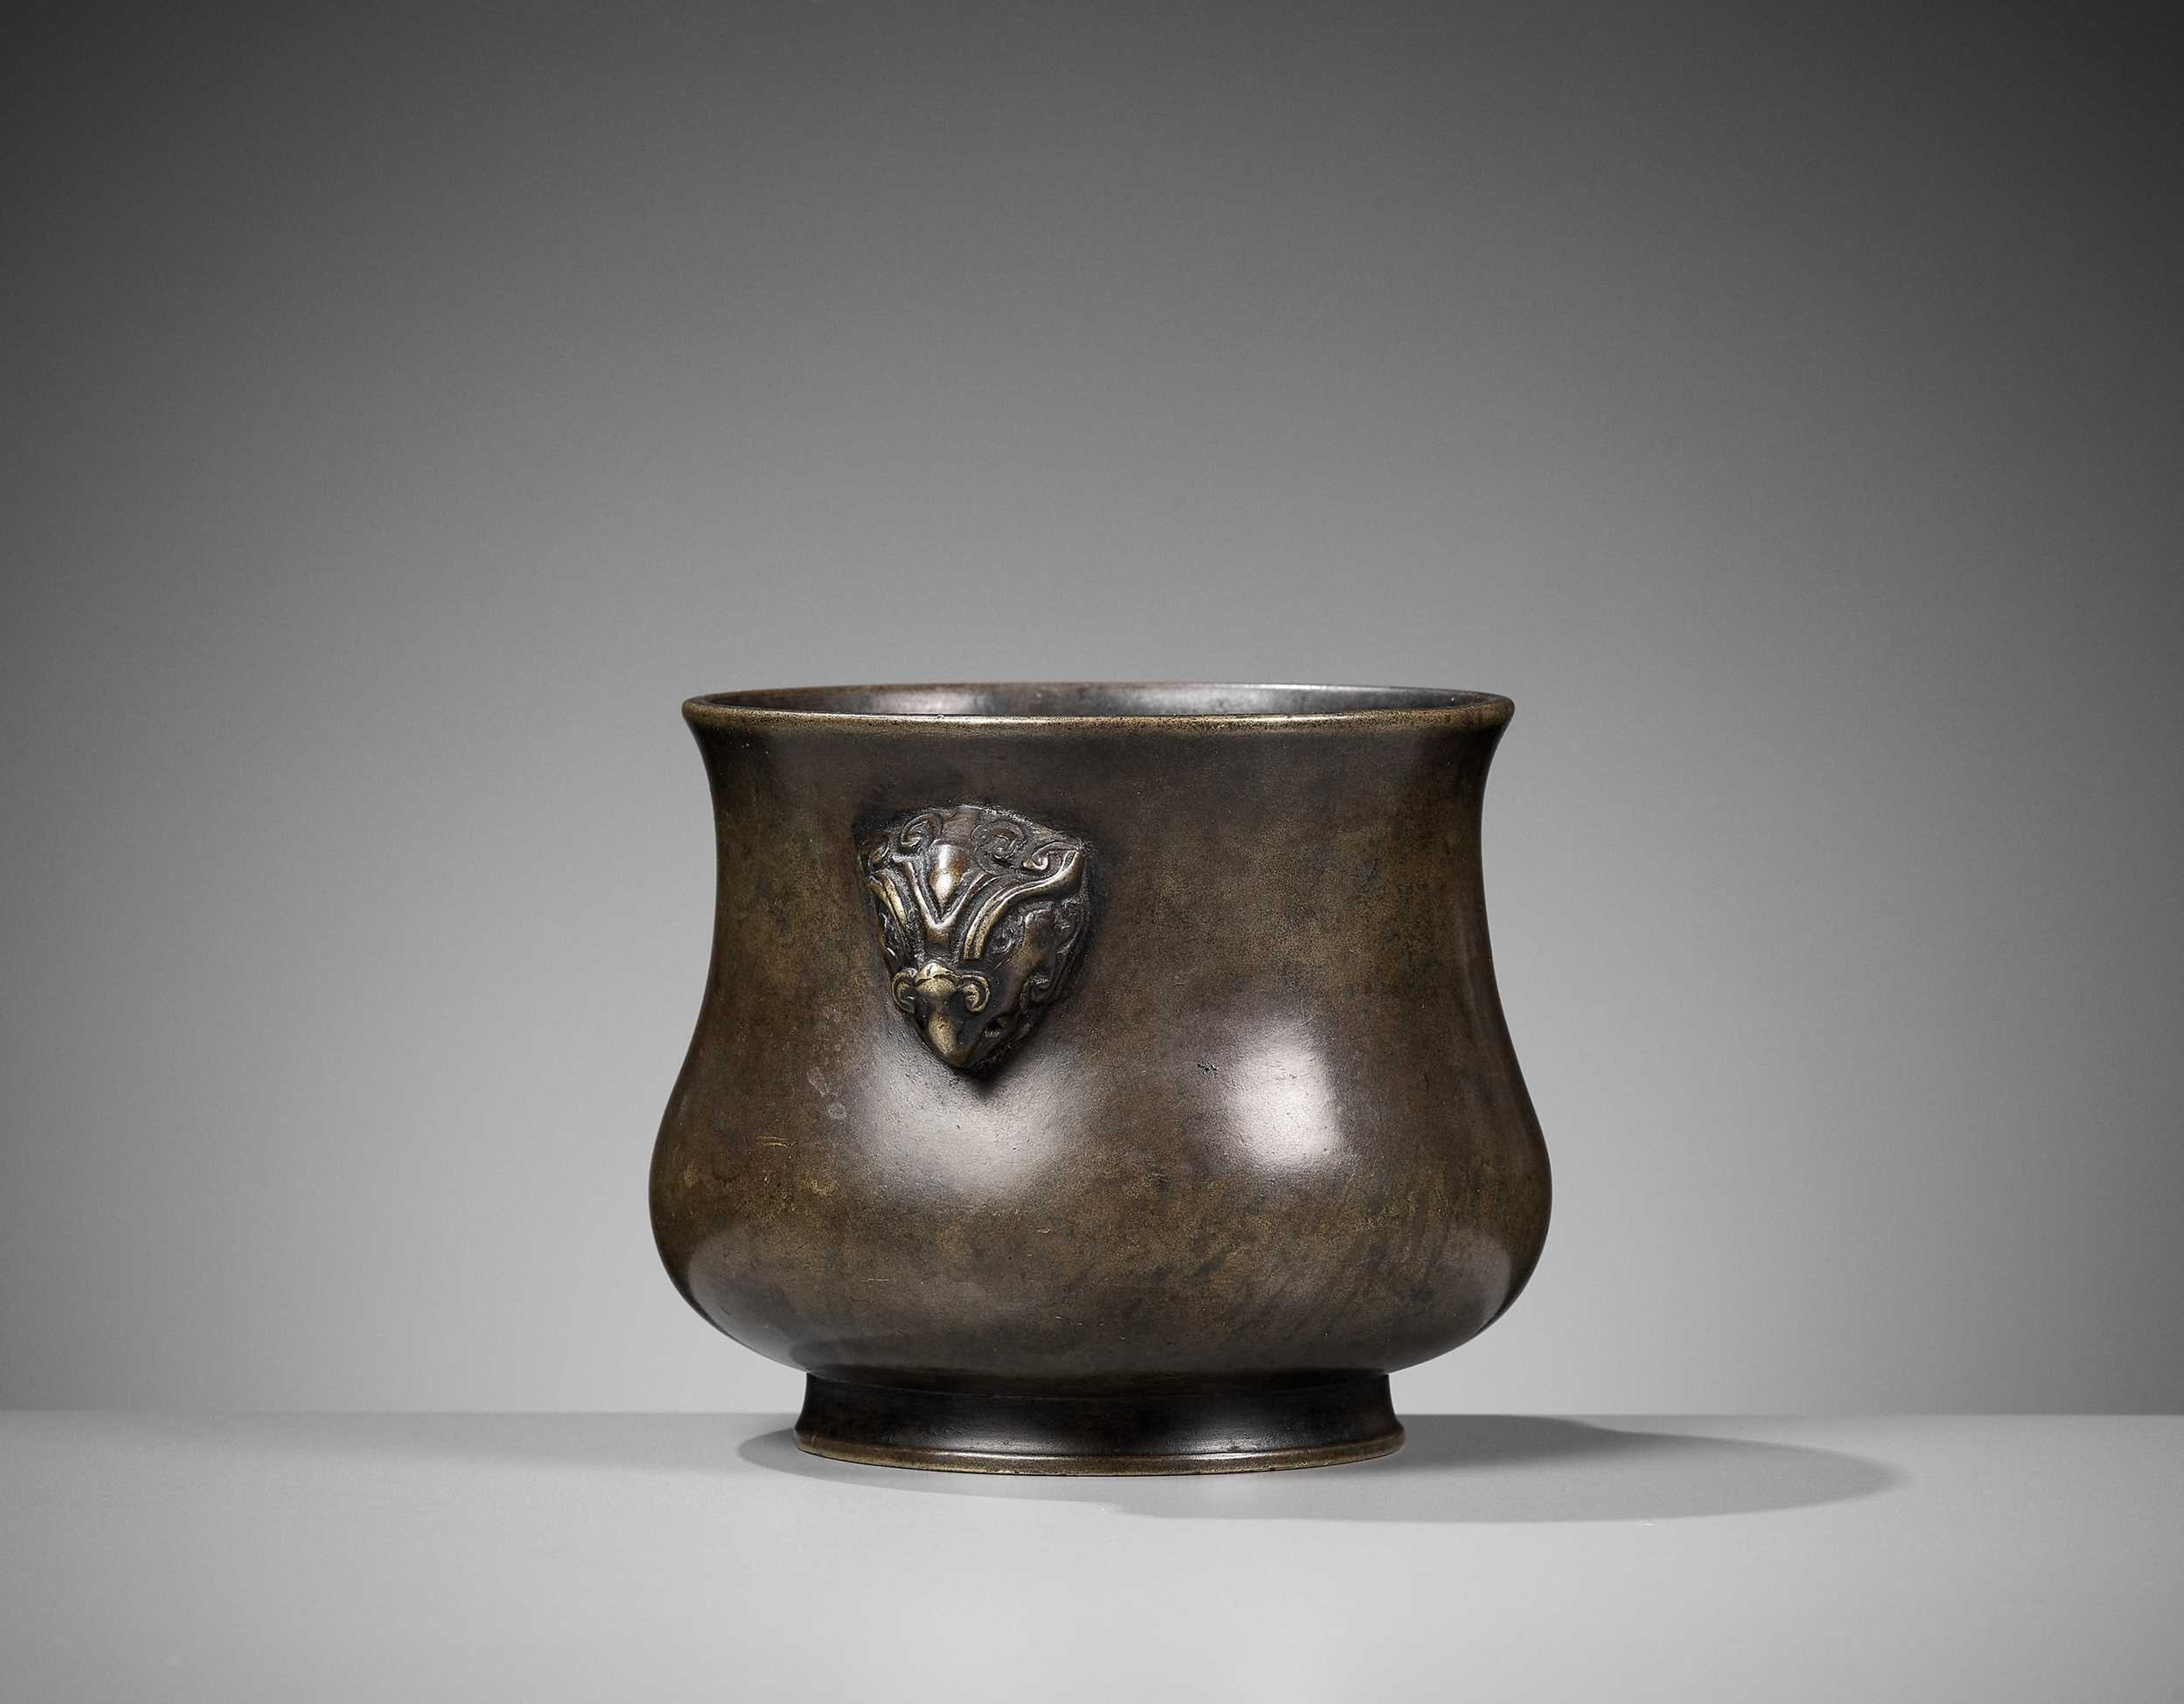 Lot 490 - A BRONZE CENSER WITH PHOENIX MASK HANDLES, 17TH-18TH CENTURY